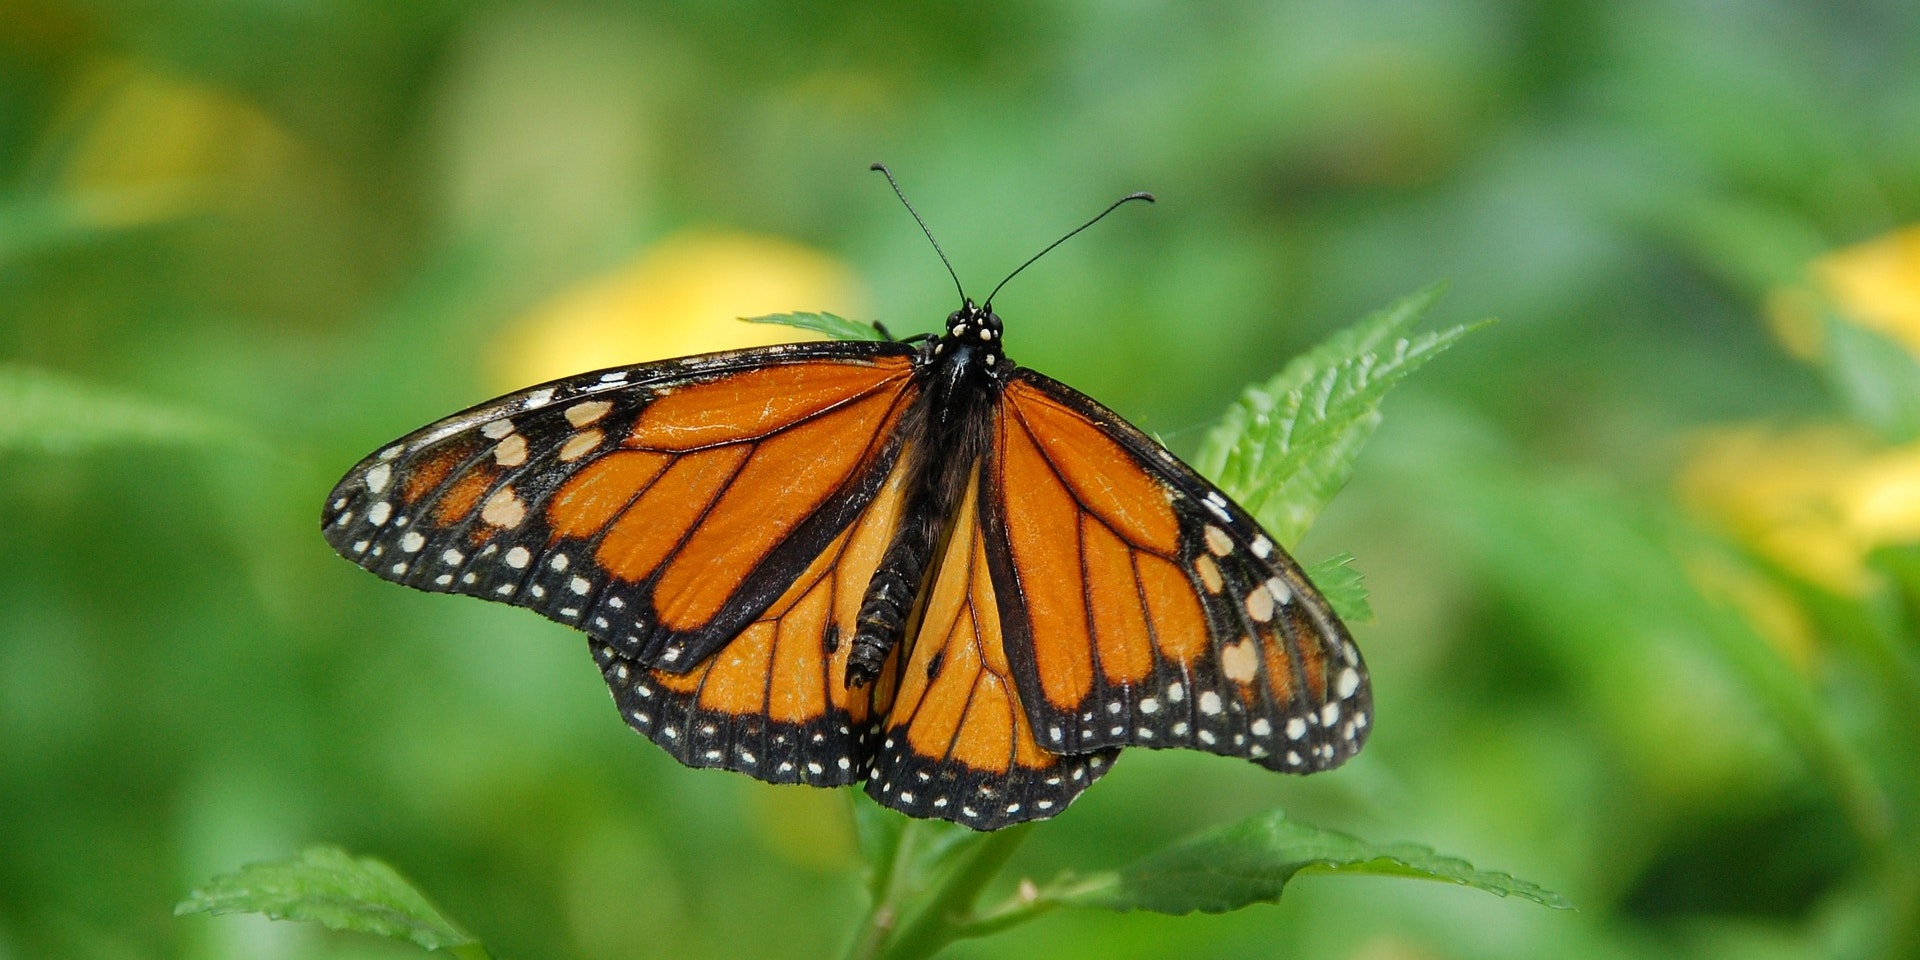 13-Year-Old New York Student Takes Action to Protect Endangered Monarch Butterflies